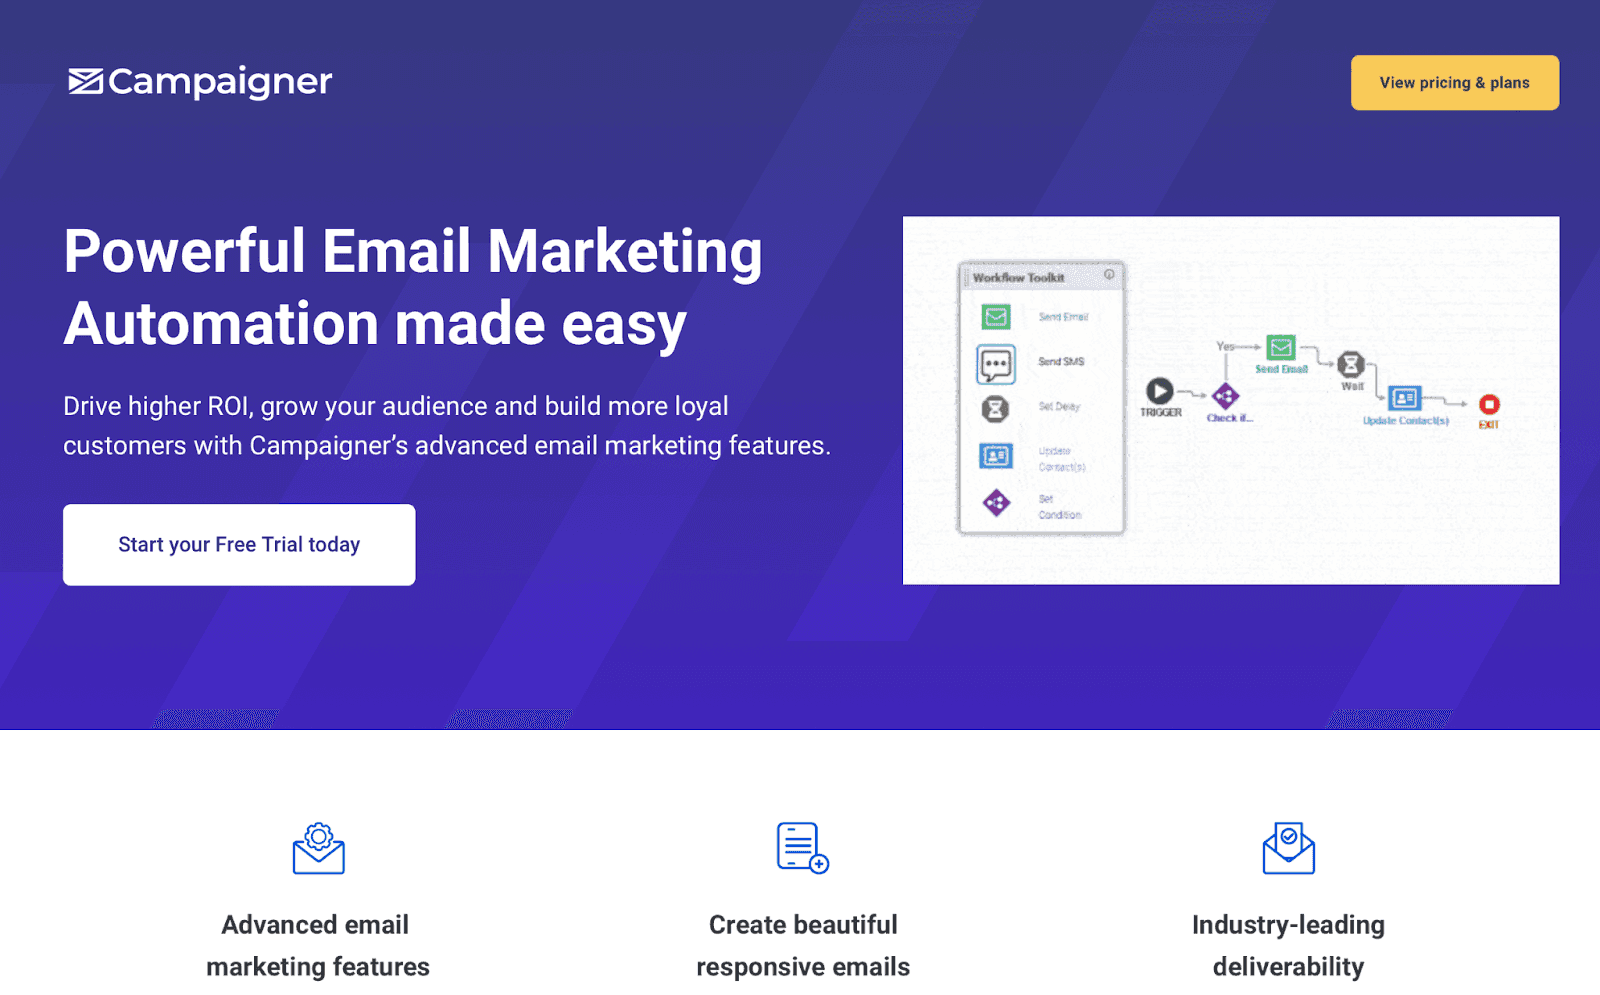 Powerful email marketing automation made easy